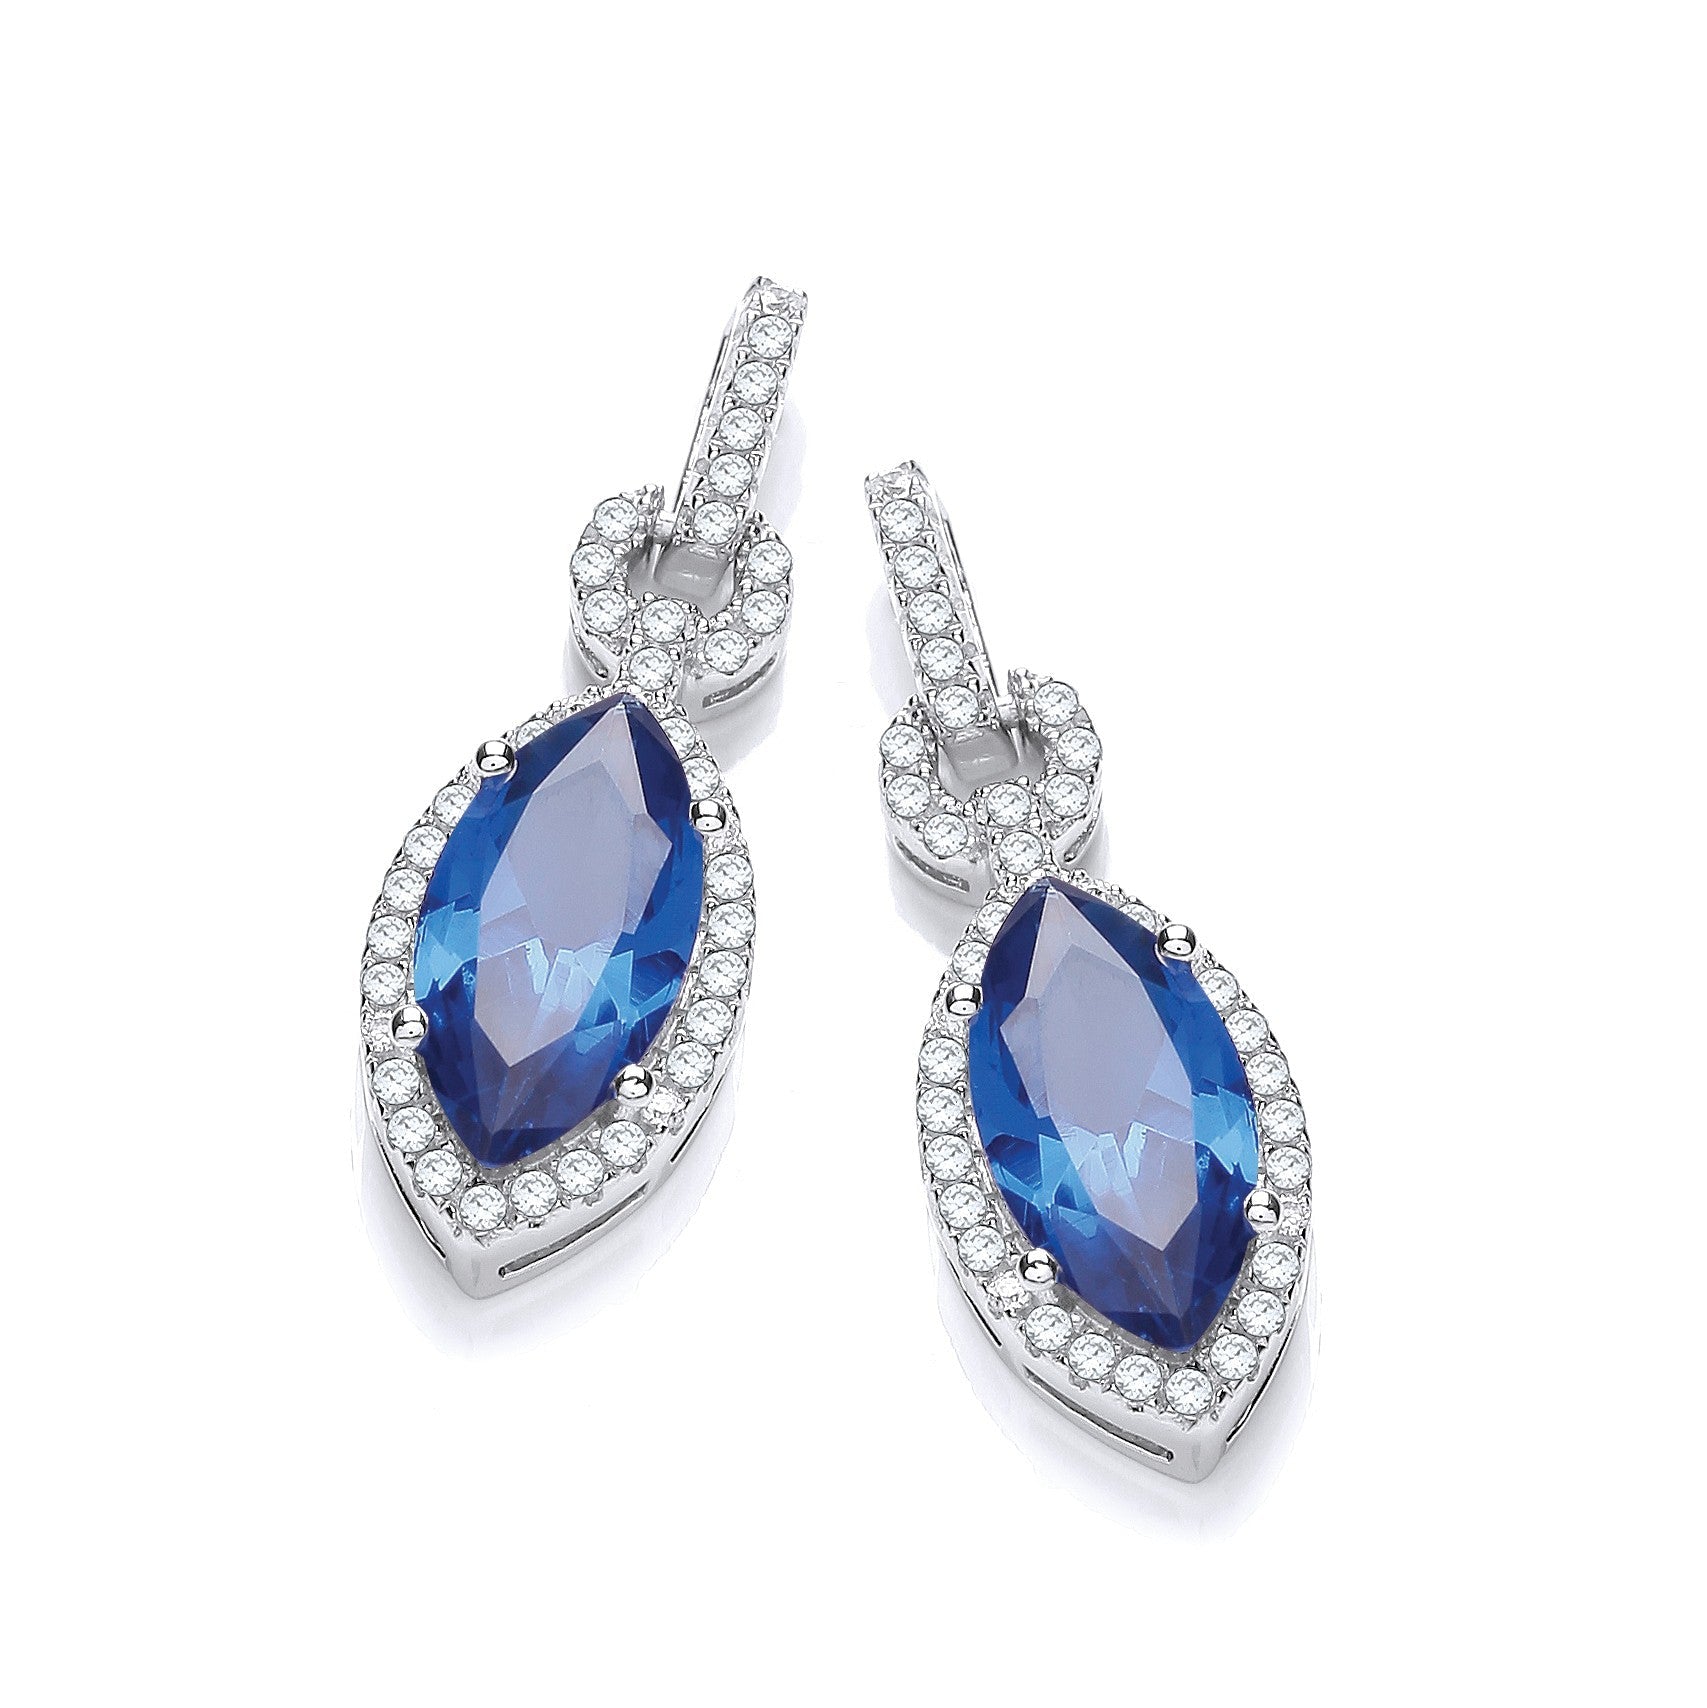 Drop 925 Sterling Silver Earrings Set With Navy/White CZs - FJewellery